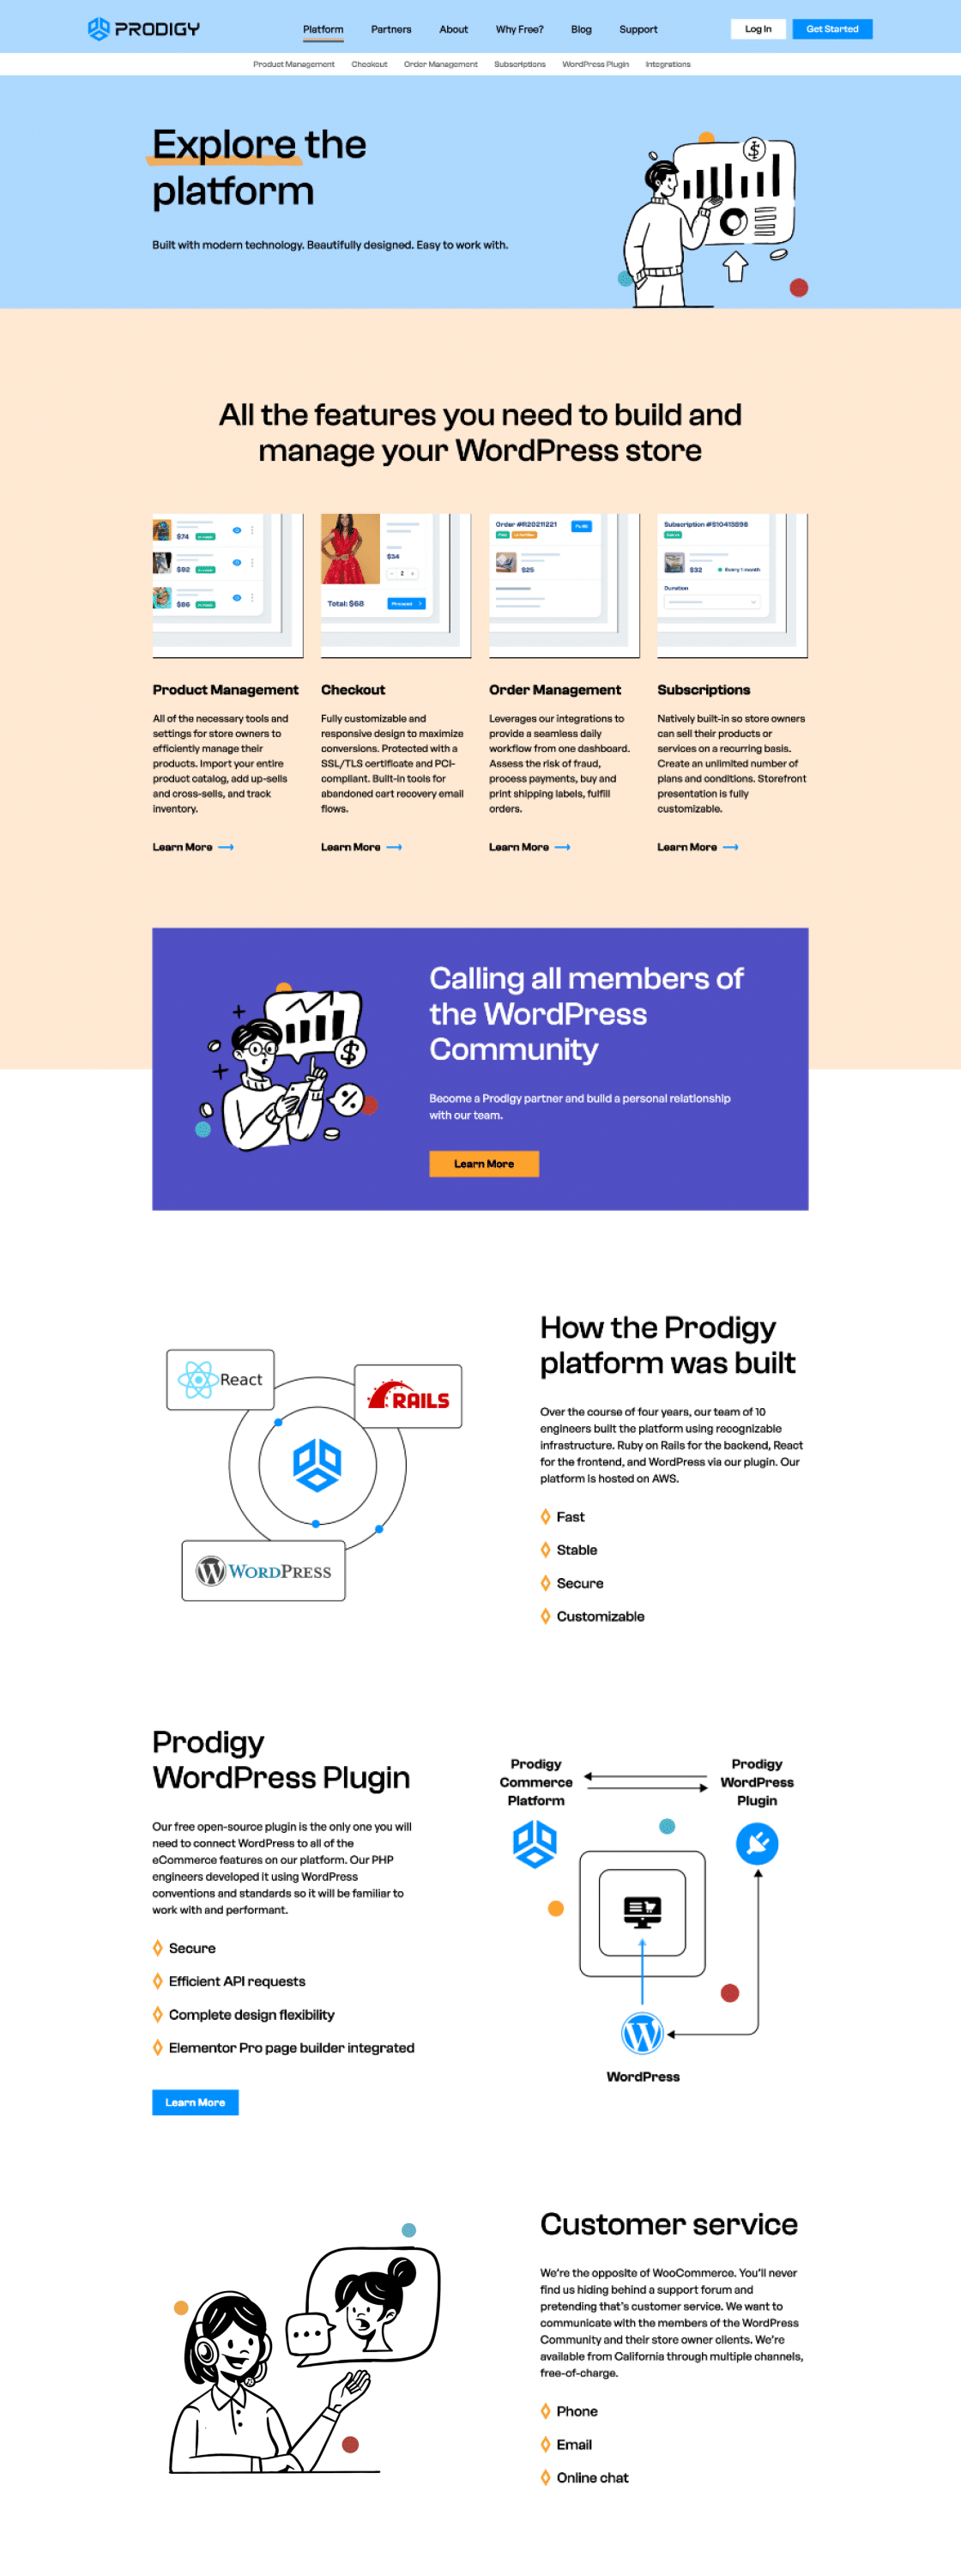 Prodigy Commerce Homepage Overview